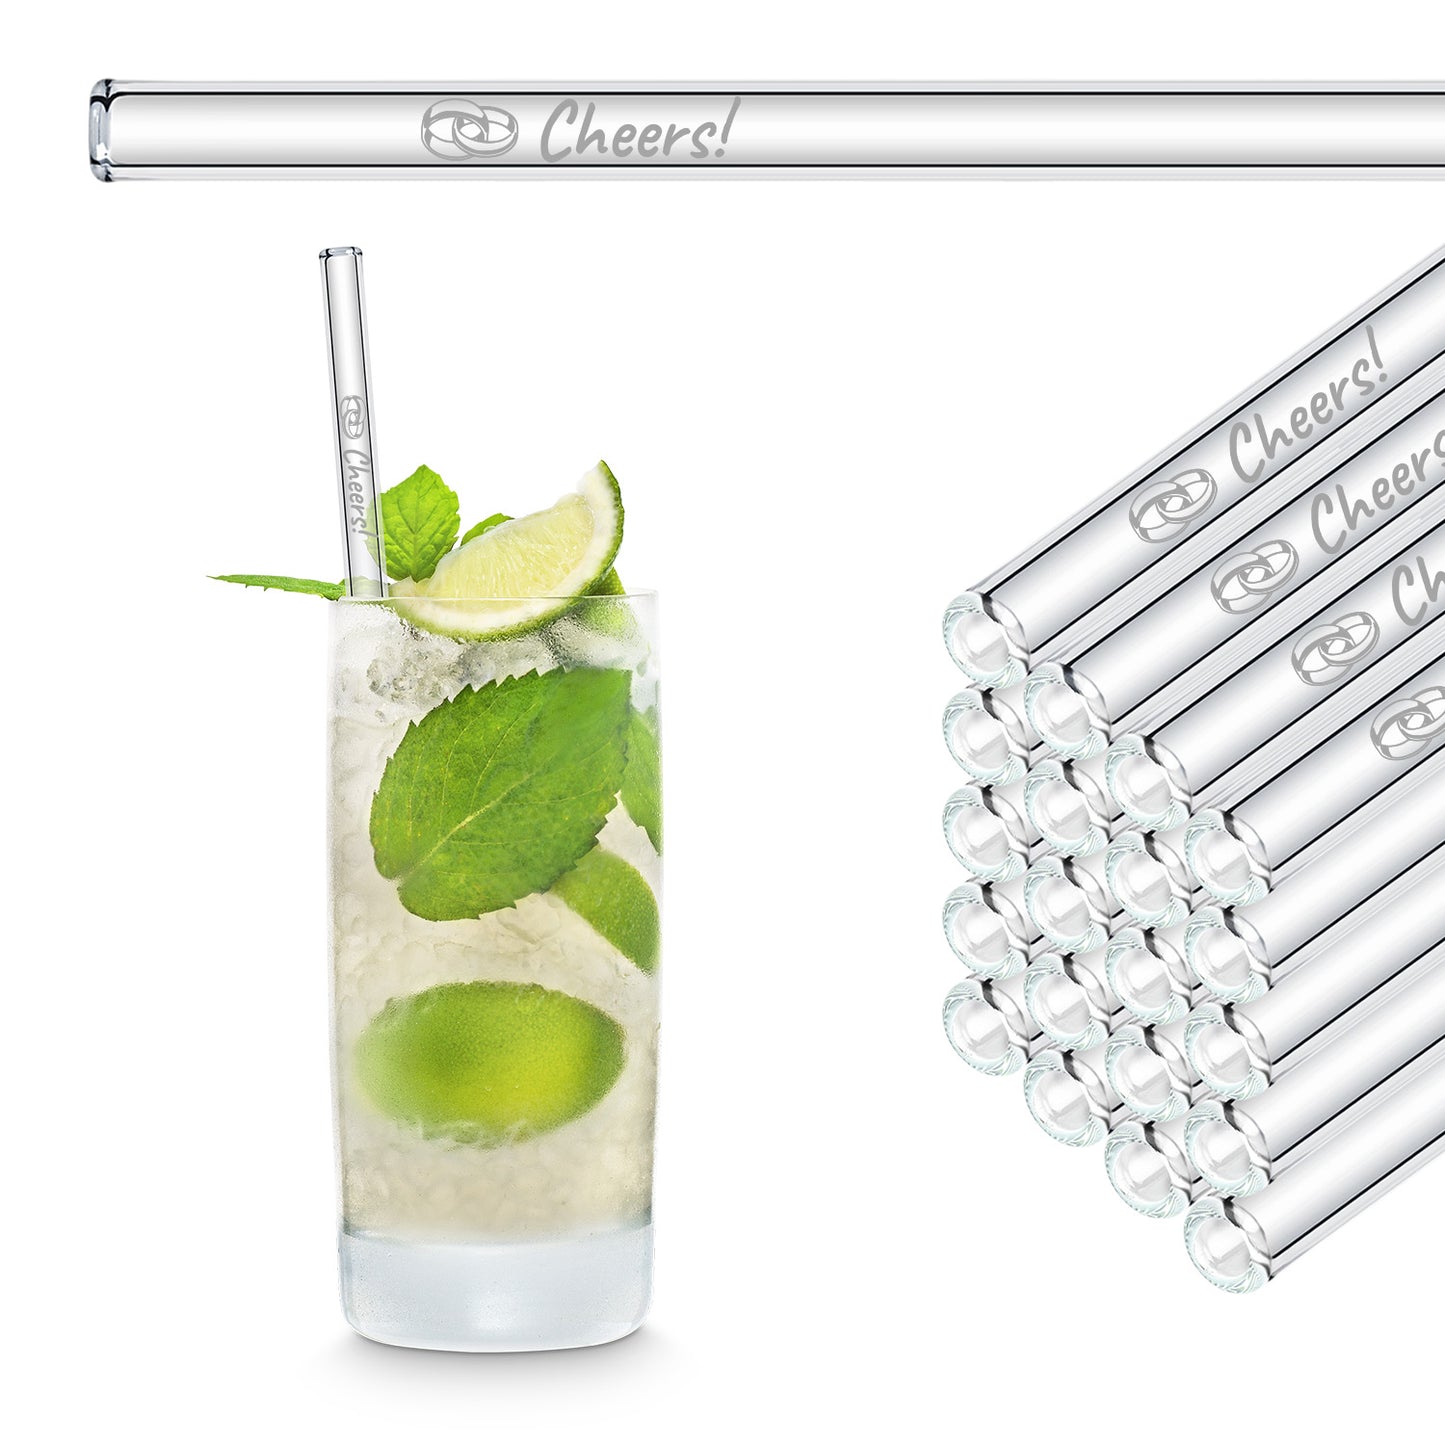 Cheers! 50x engraved glass straws - gift for wedding guests